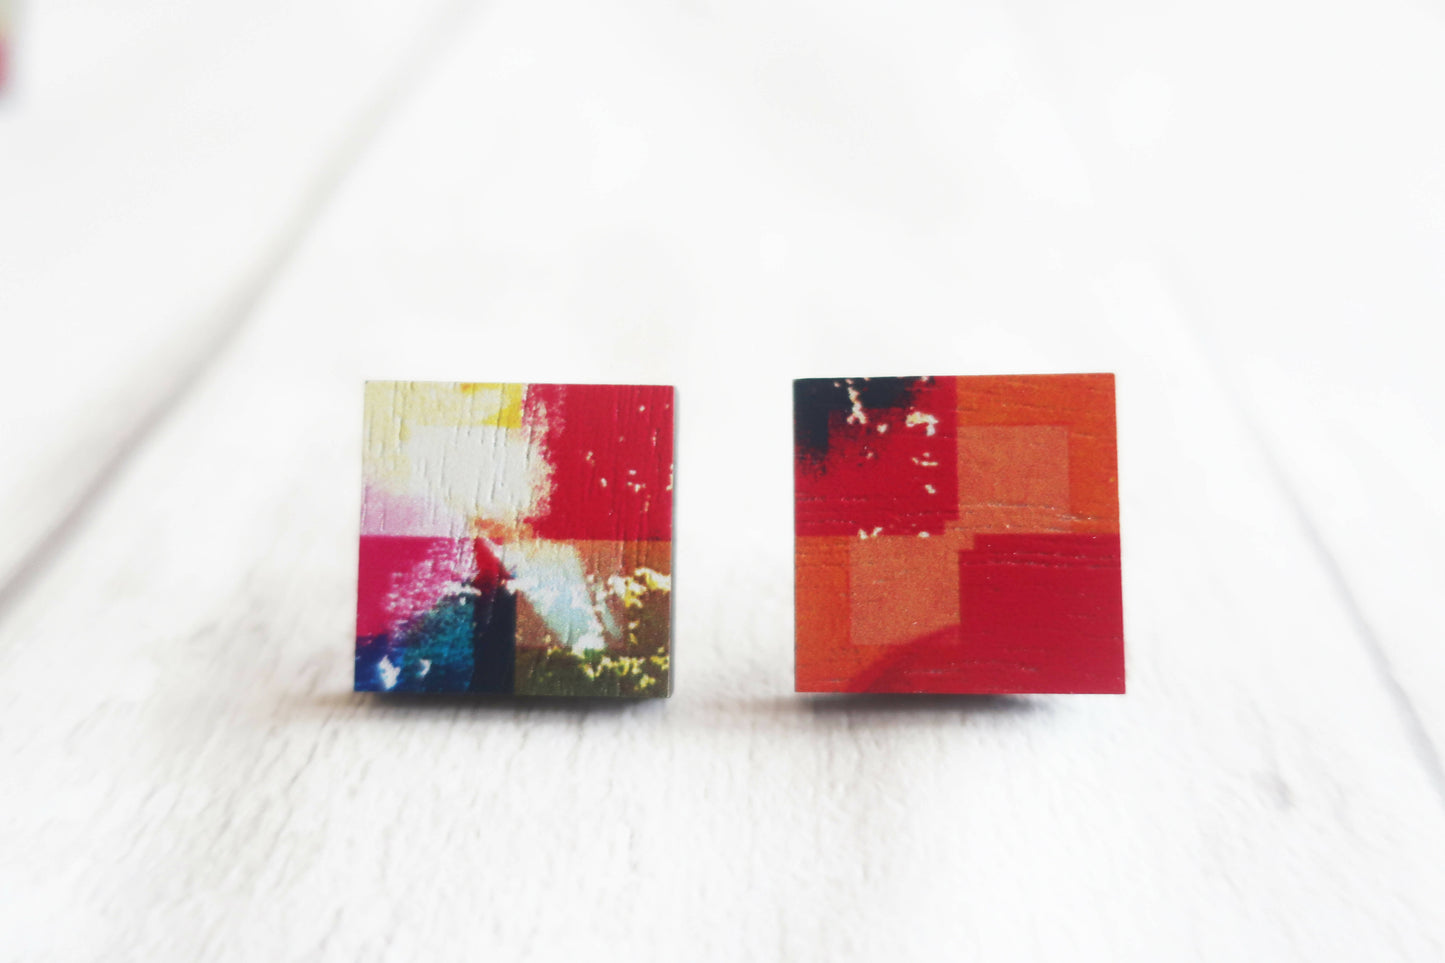 Abstract mismatched wooden earrings